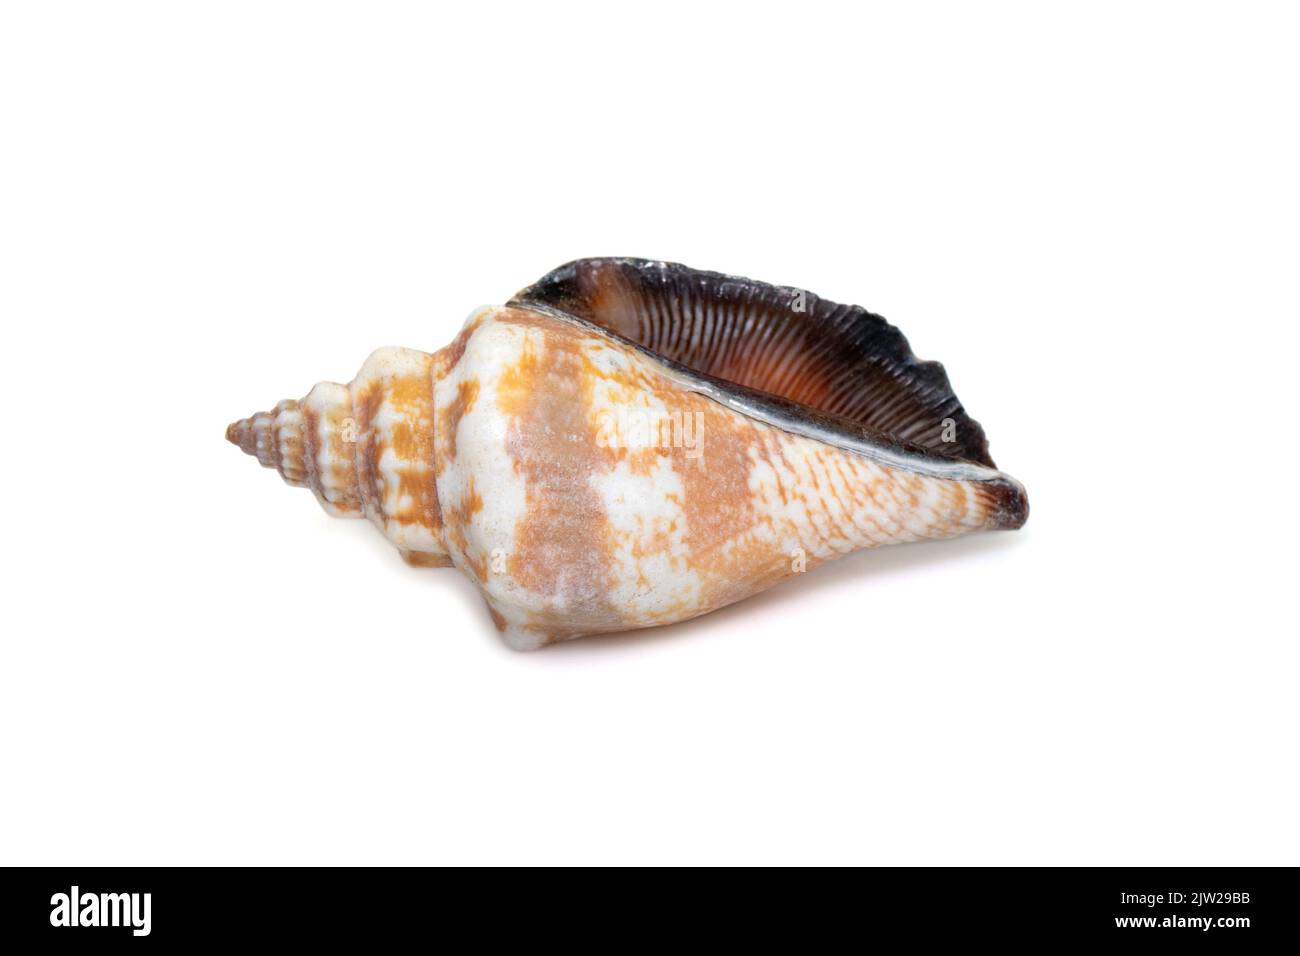 Image of canarium urceus is a species of sea snail, a marine gastropod mollusk in the family Strombidae, the true conchs isolated on white background. Stock Photo